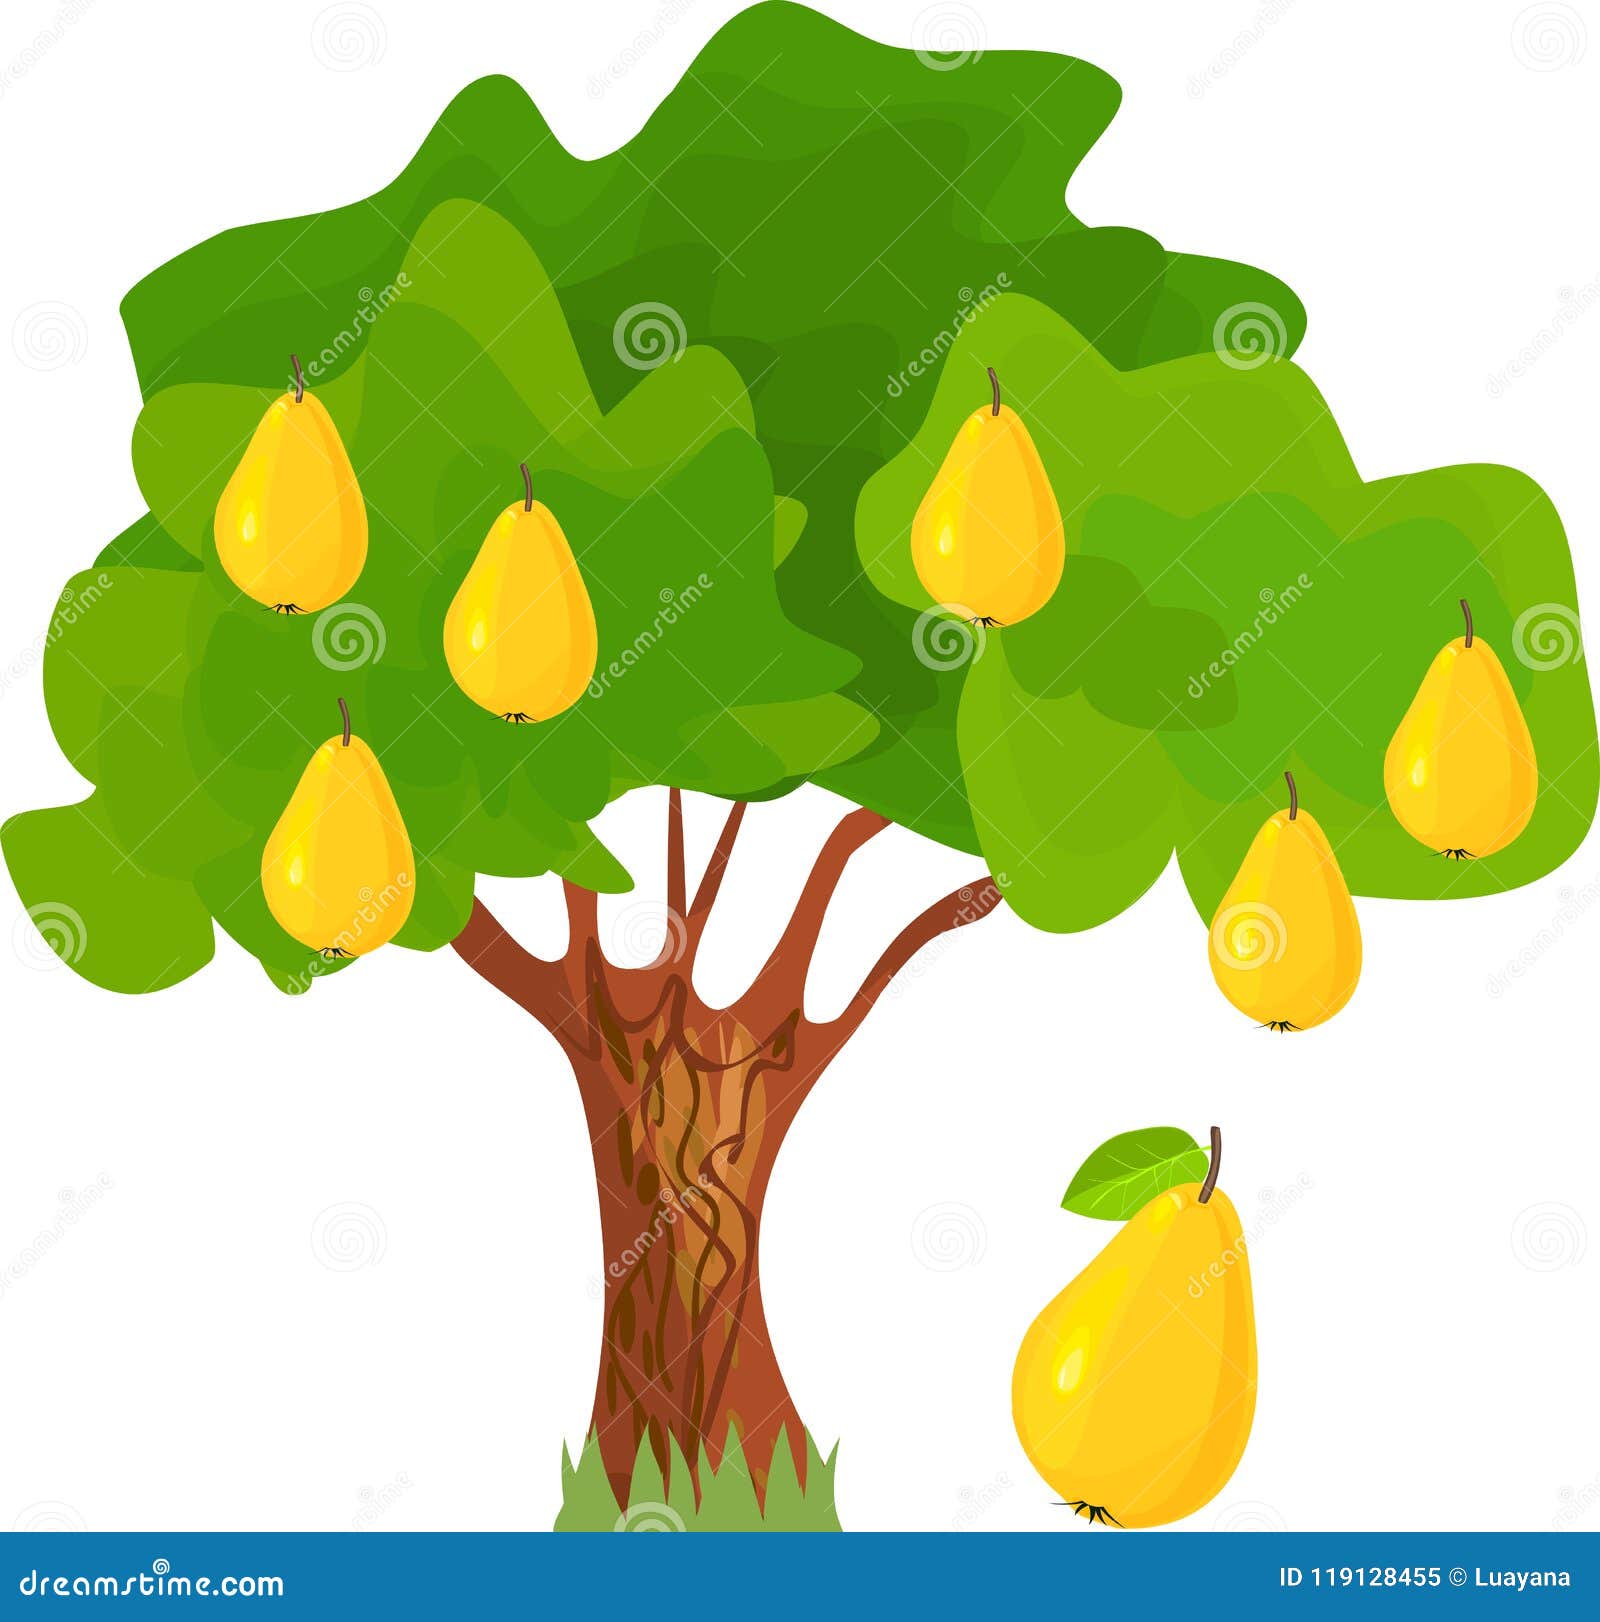 Pear-tree with Green Leaves and Ripe Yellow Fruits Stock Vector ...